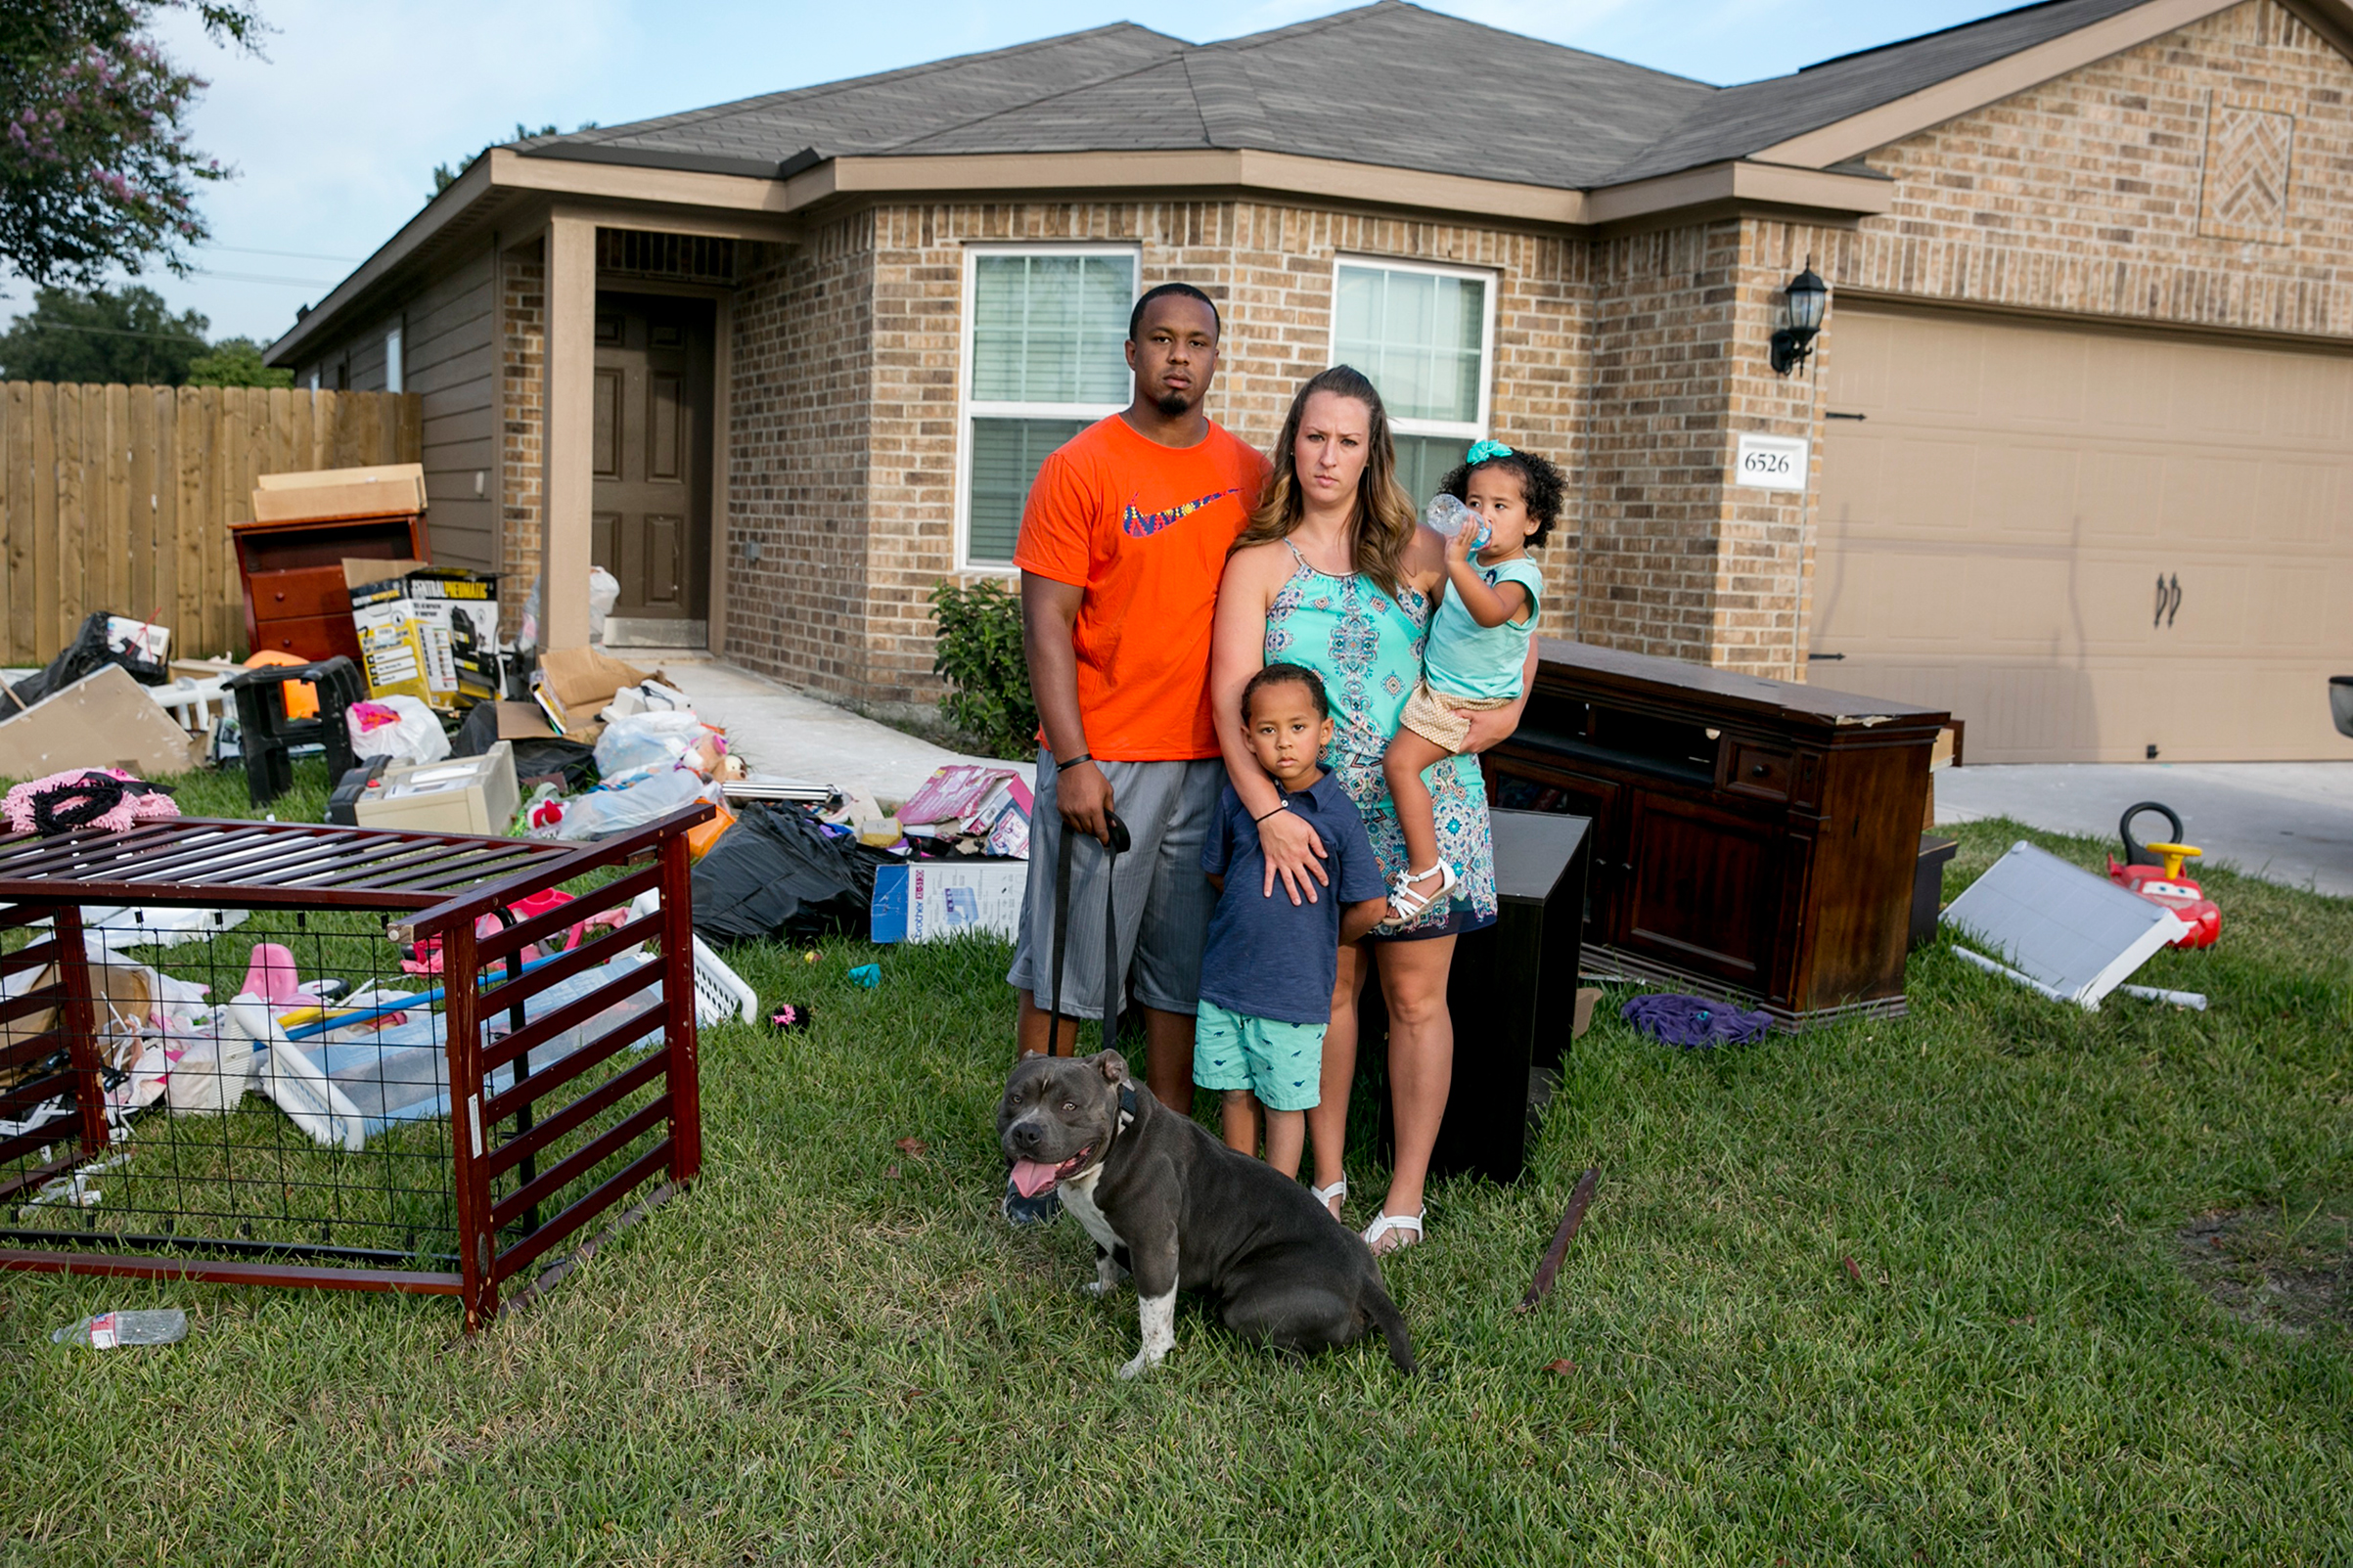 Isiah Courtney stands in the front yard of his Houston home with his wife, Danielle, son Bryson, daughter Aubree and dog Bruce (Ilana Panich-Linsman for TIME)